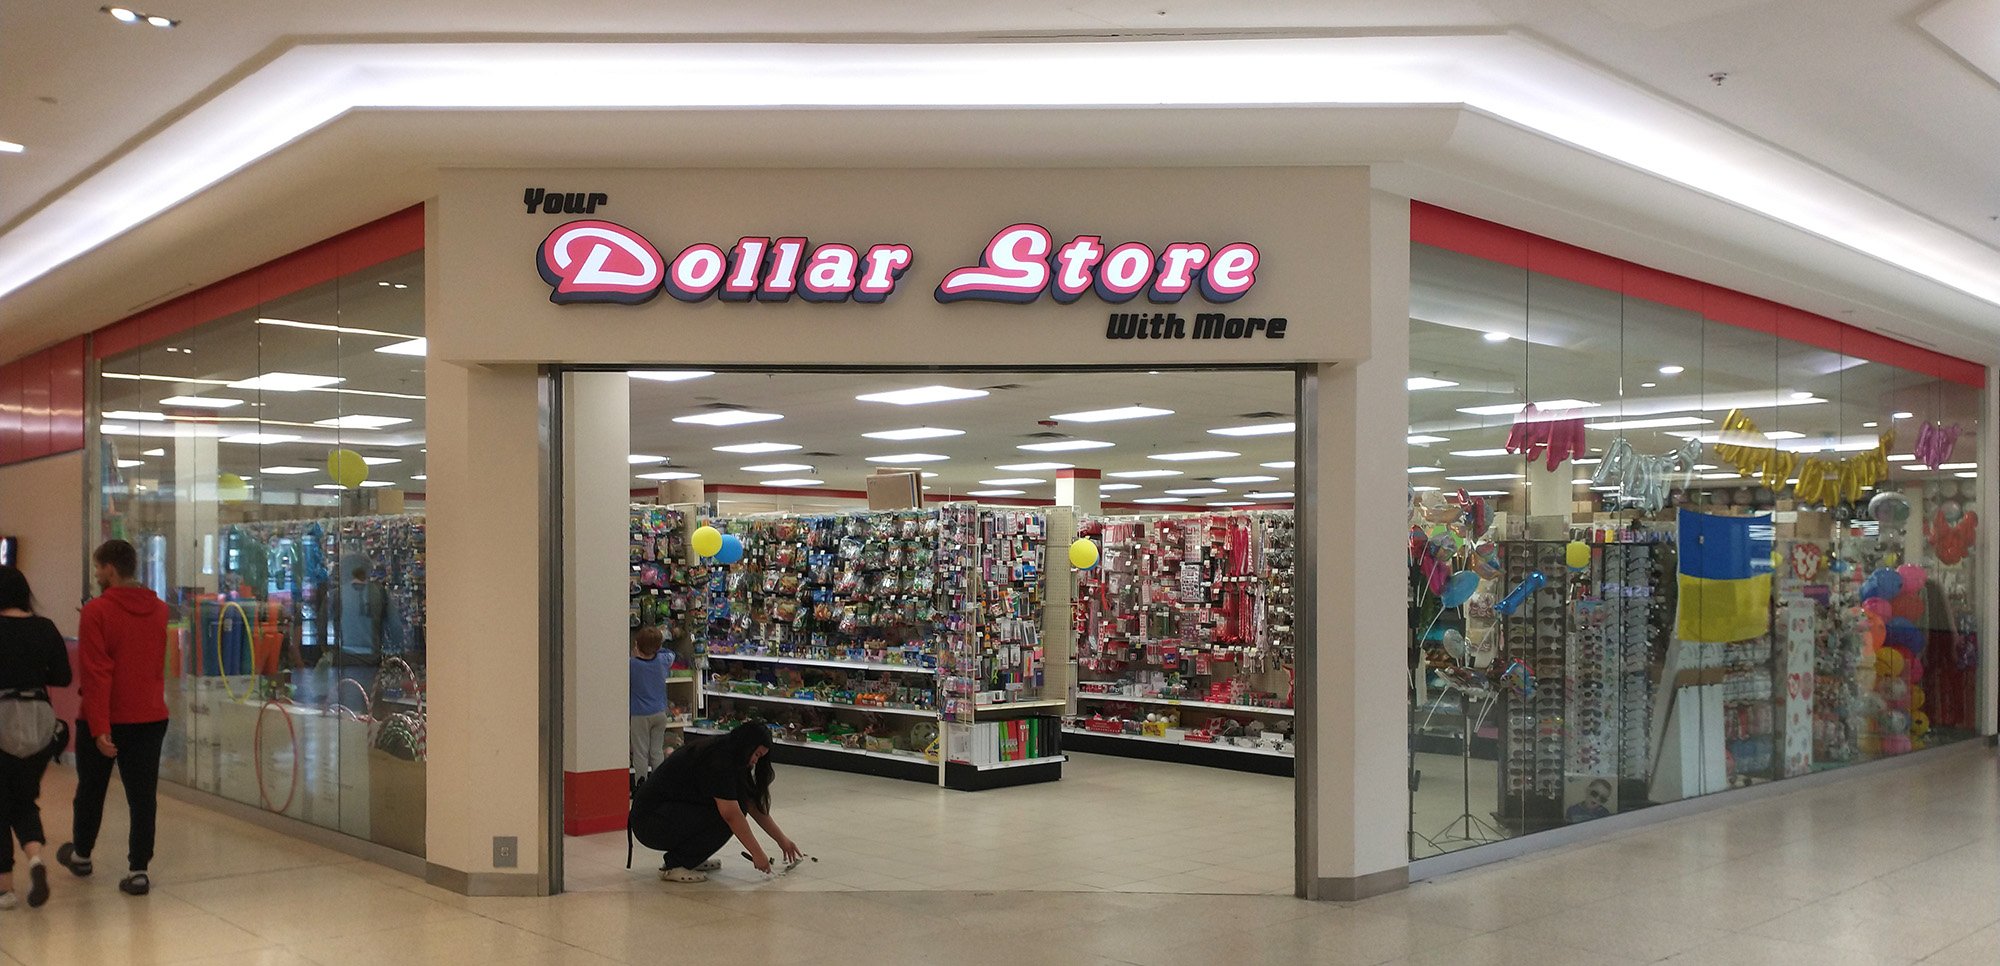 A dollar store "and more"??